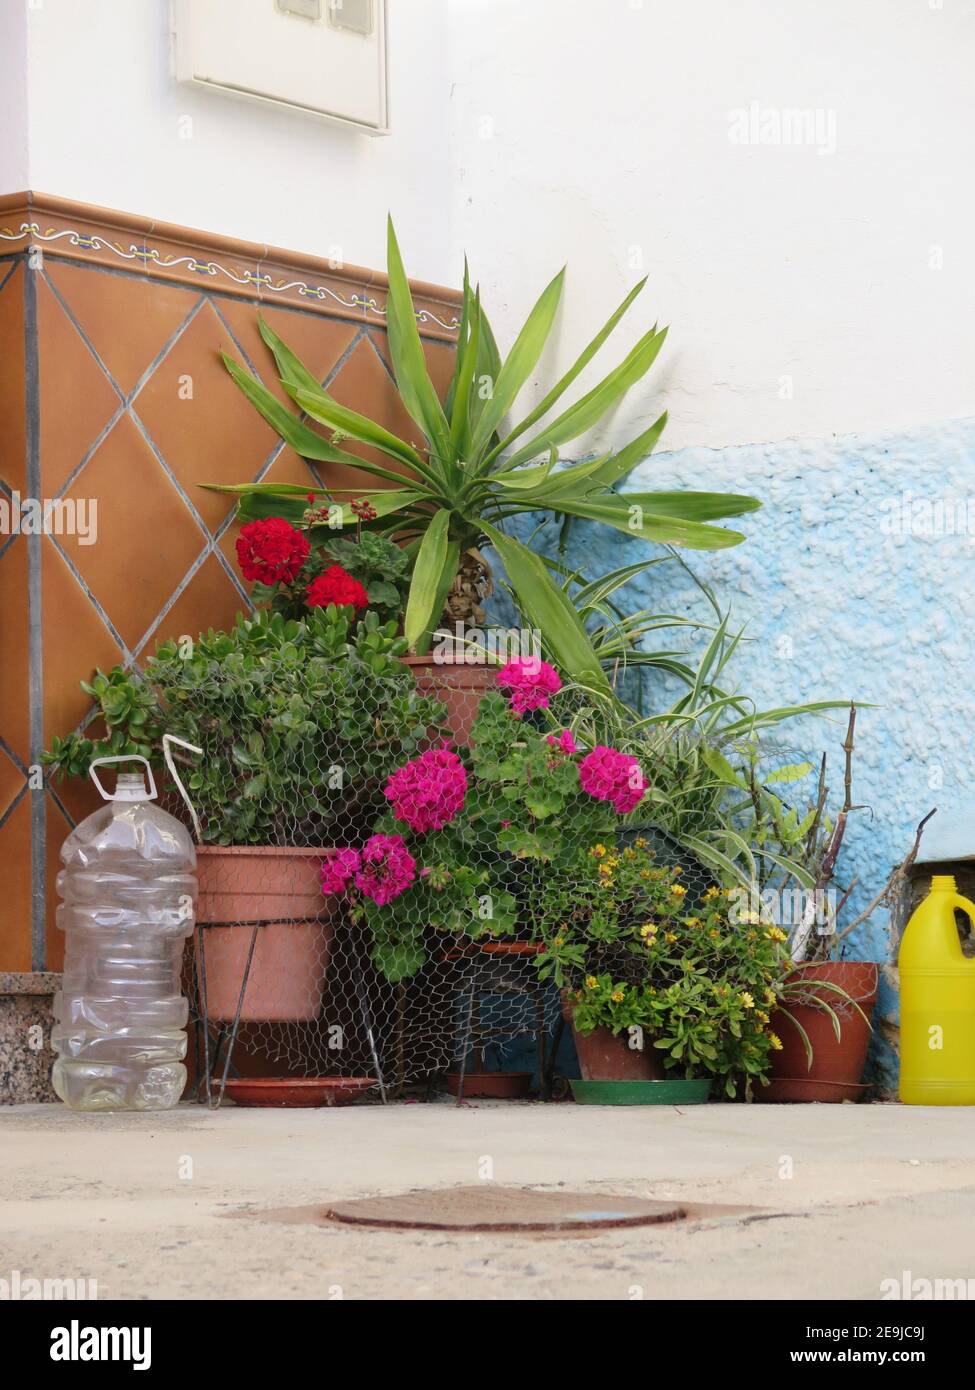 Small Flower display on pavement with with water bottles to deter dogs outside residential house in Andalusian village Stock Photo